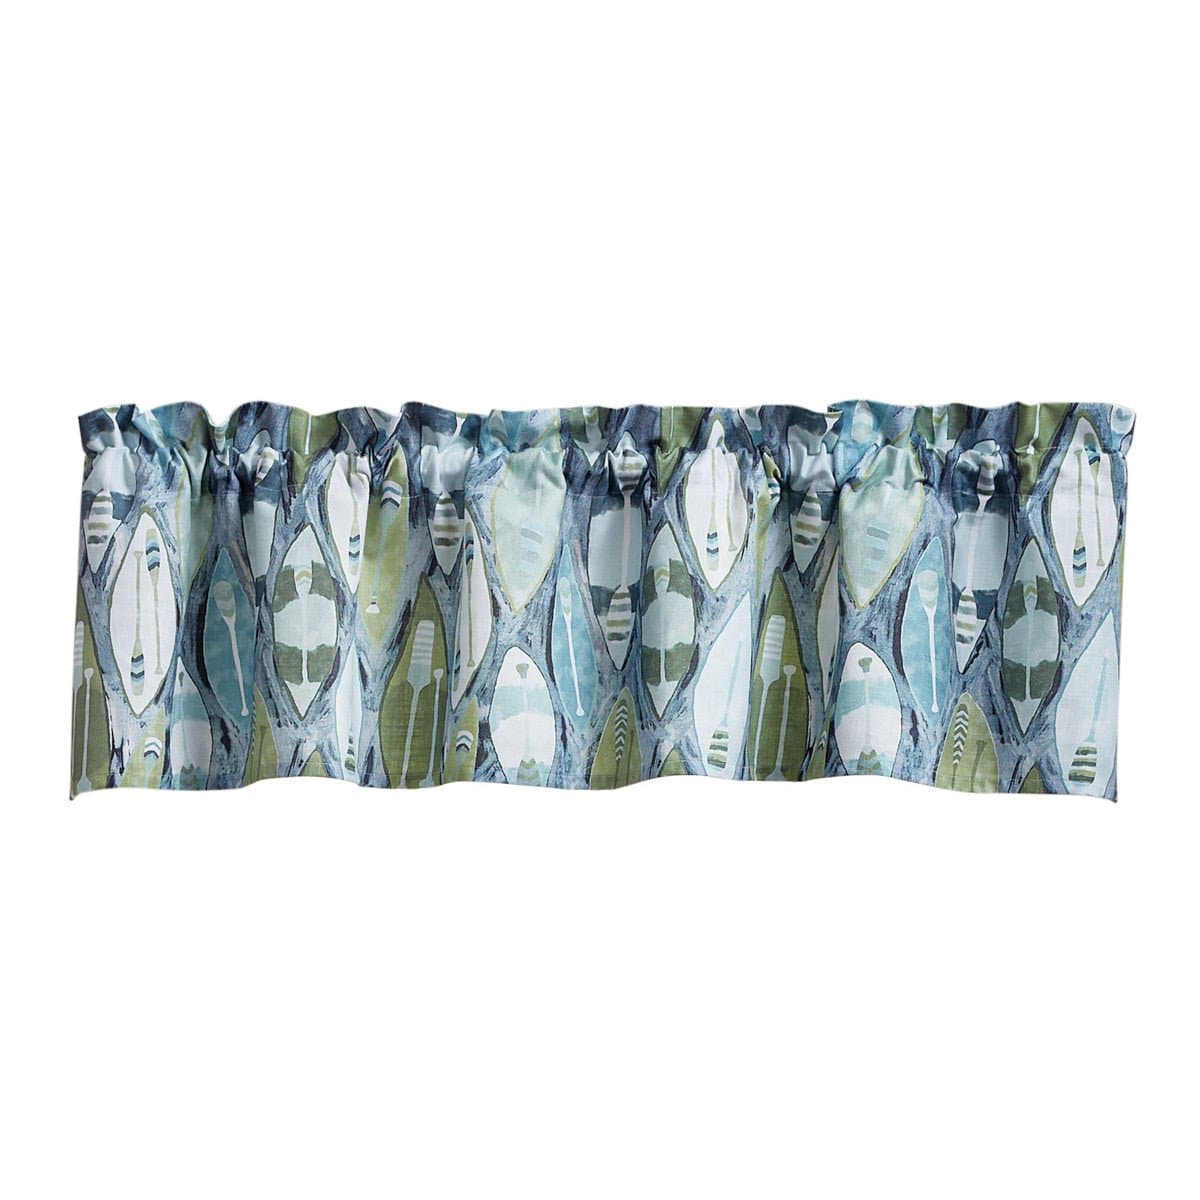 Colorful Canoes Printed Valance Unlined-Park Designs-The Village Merchant